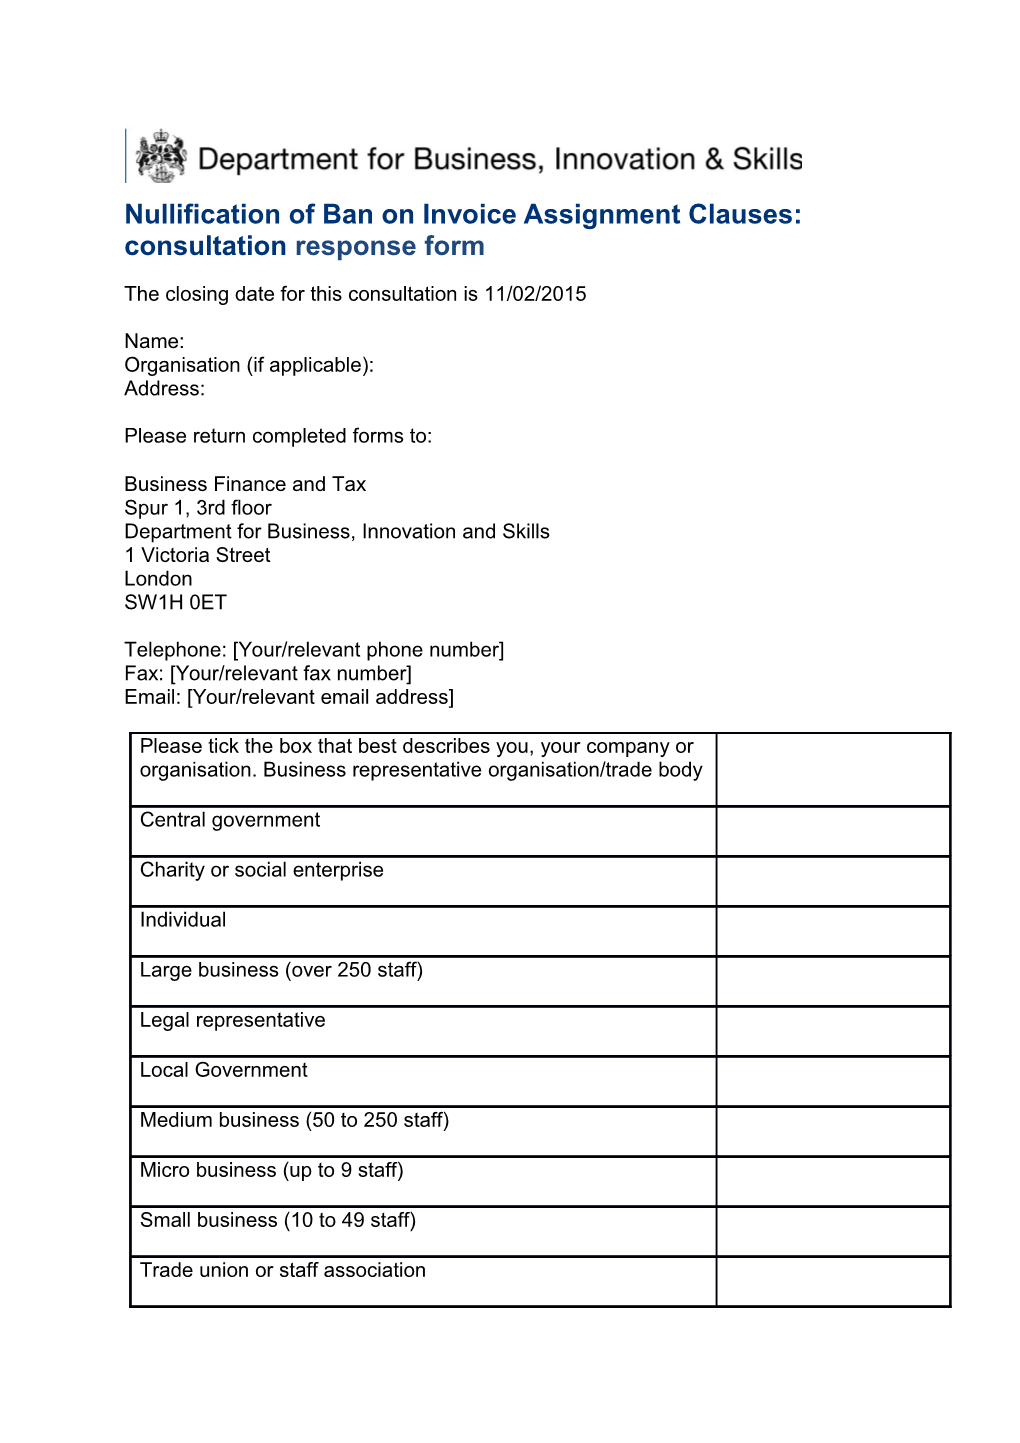 Nullification of Ban on Invoice Assignment Clauses: Consultation Response Form